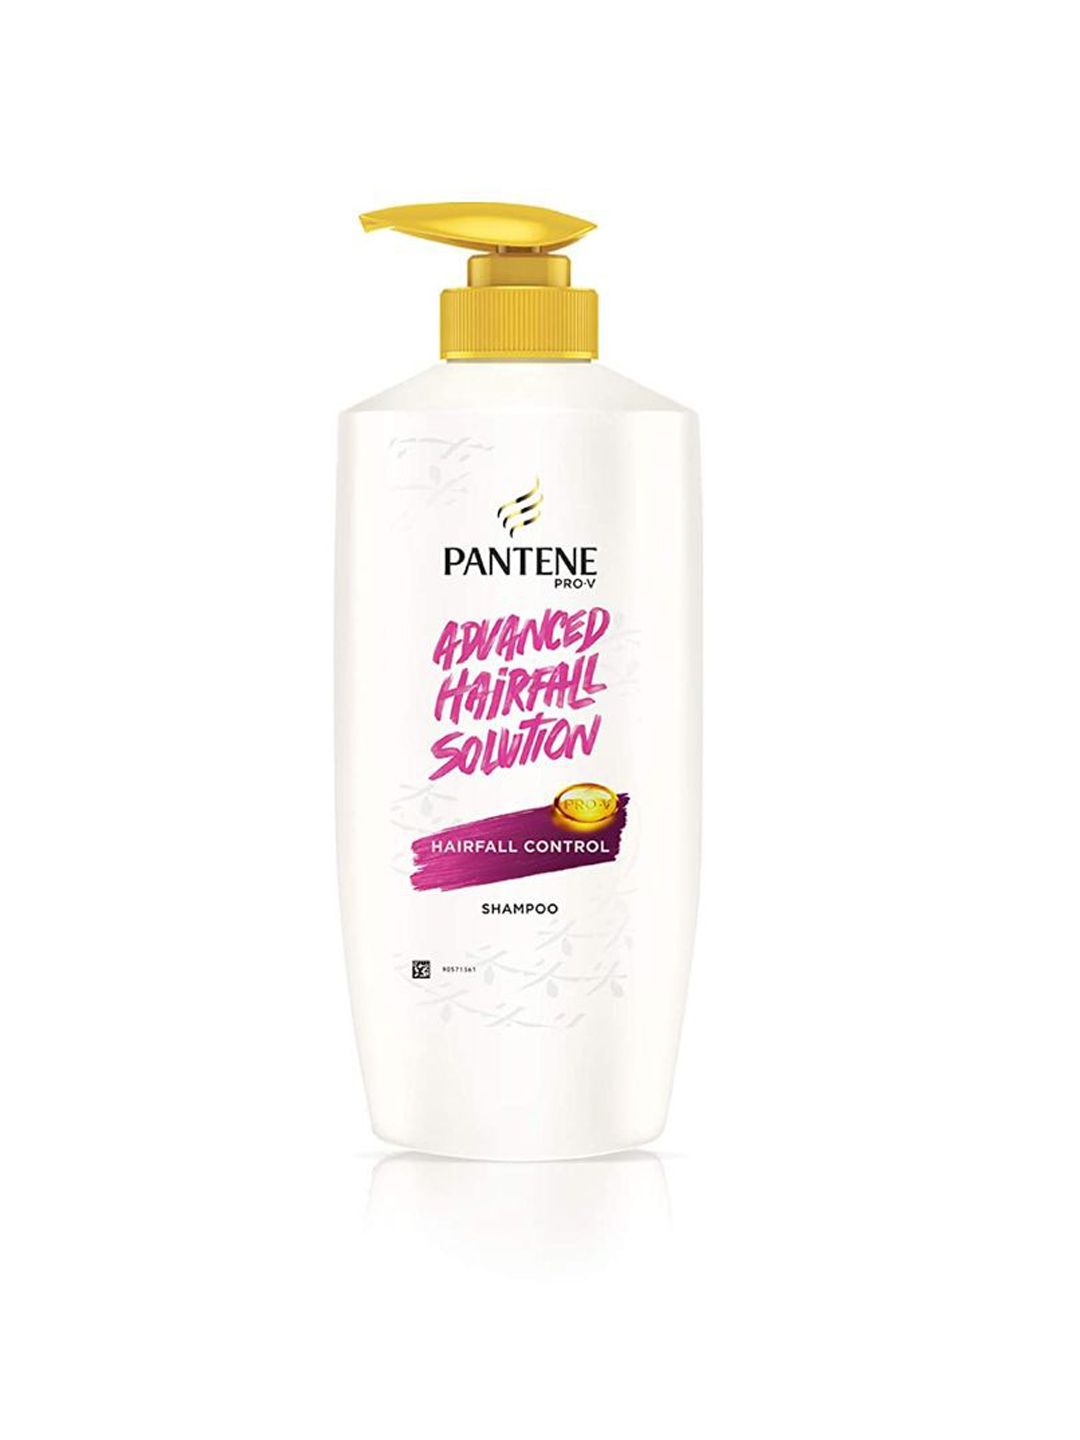 Pantene Unisex Advanced Solution Hairfall Control Shampoo with Pro-Vitamin 650 ml Price in India